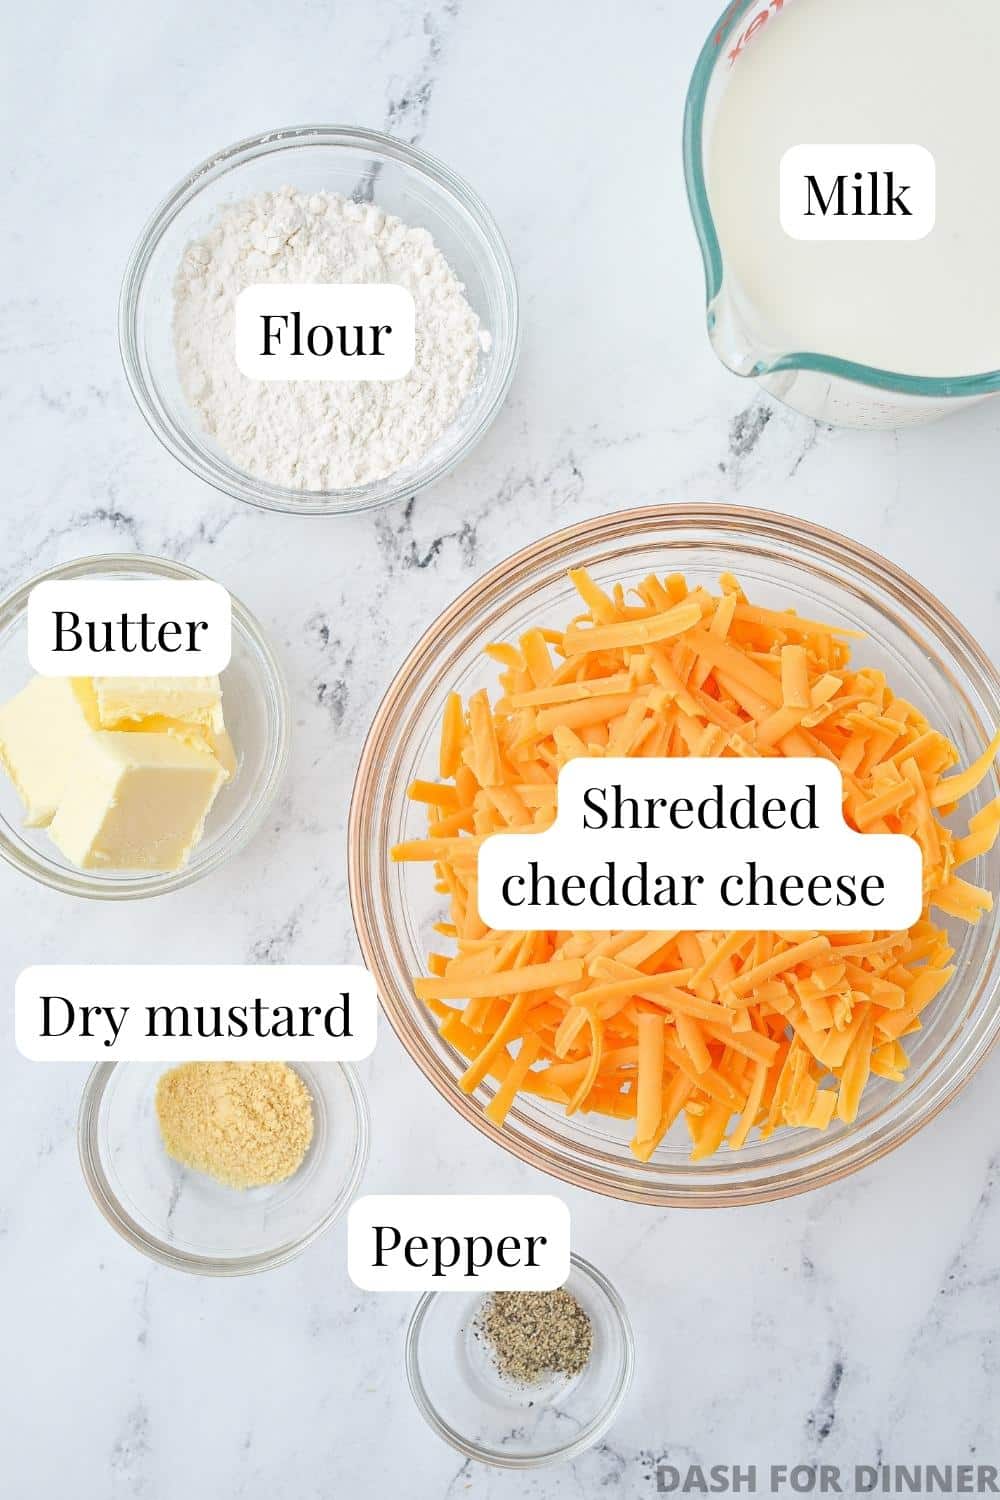 The ingredients needed to make cheese sauce: shredded cheddar, butter, milk, flour, dry mustard, etc.